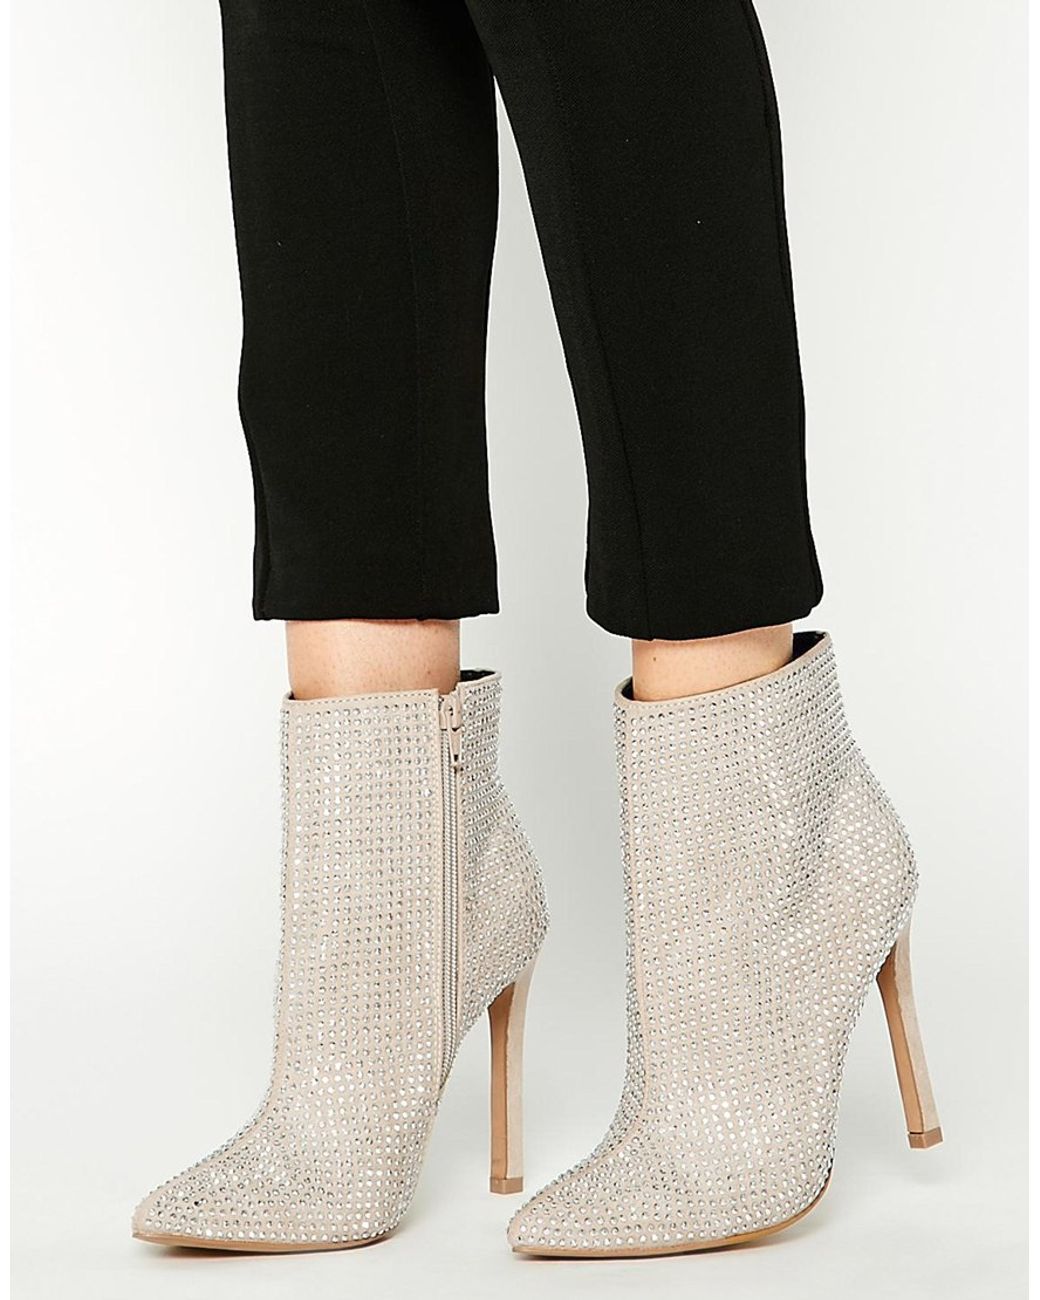 ALDO Nyderrarien Glitter Nude Heeled Ankle Boots in White | Lyst